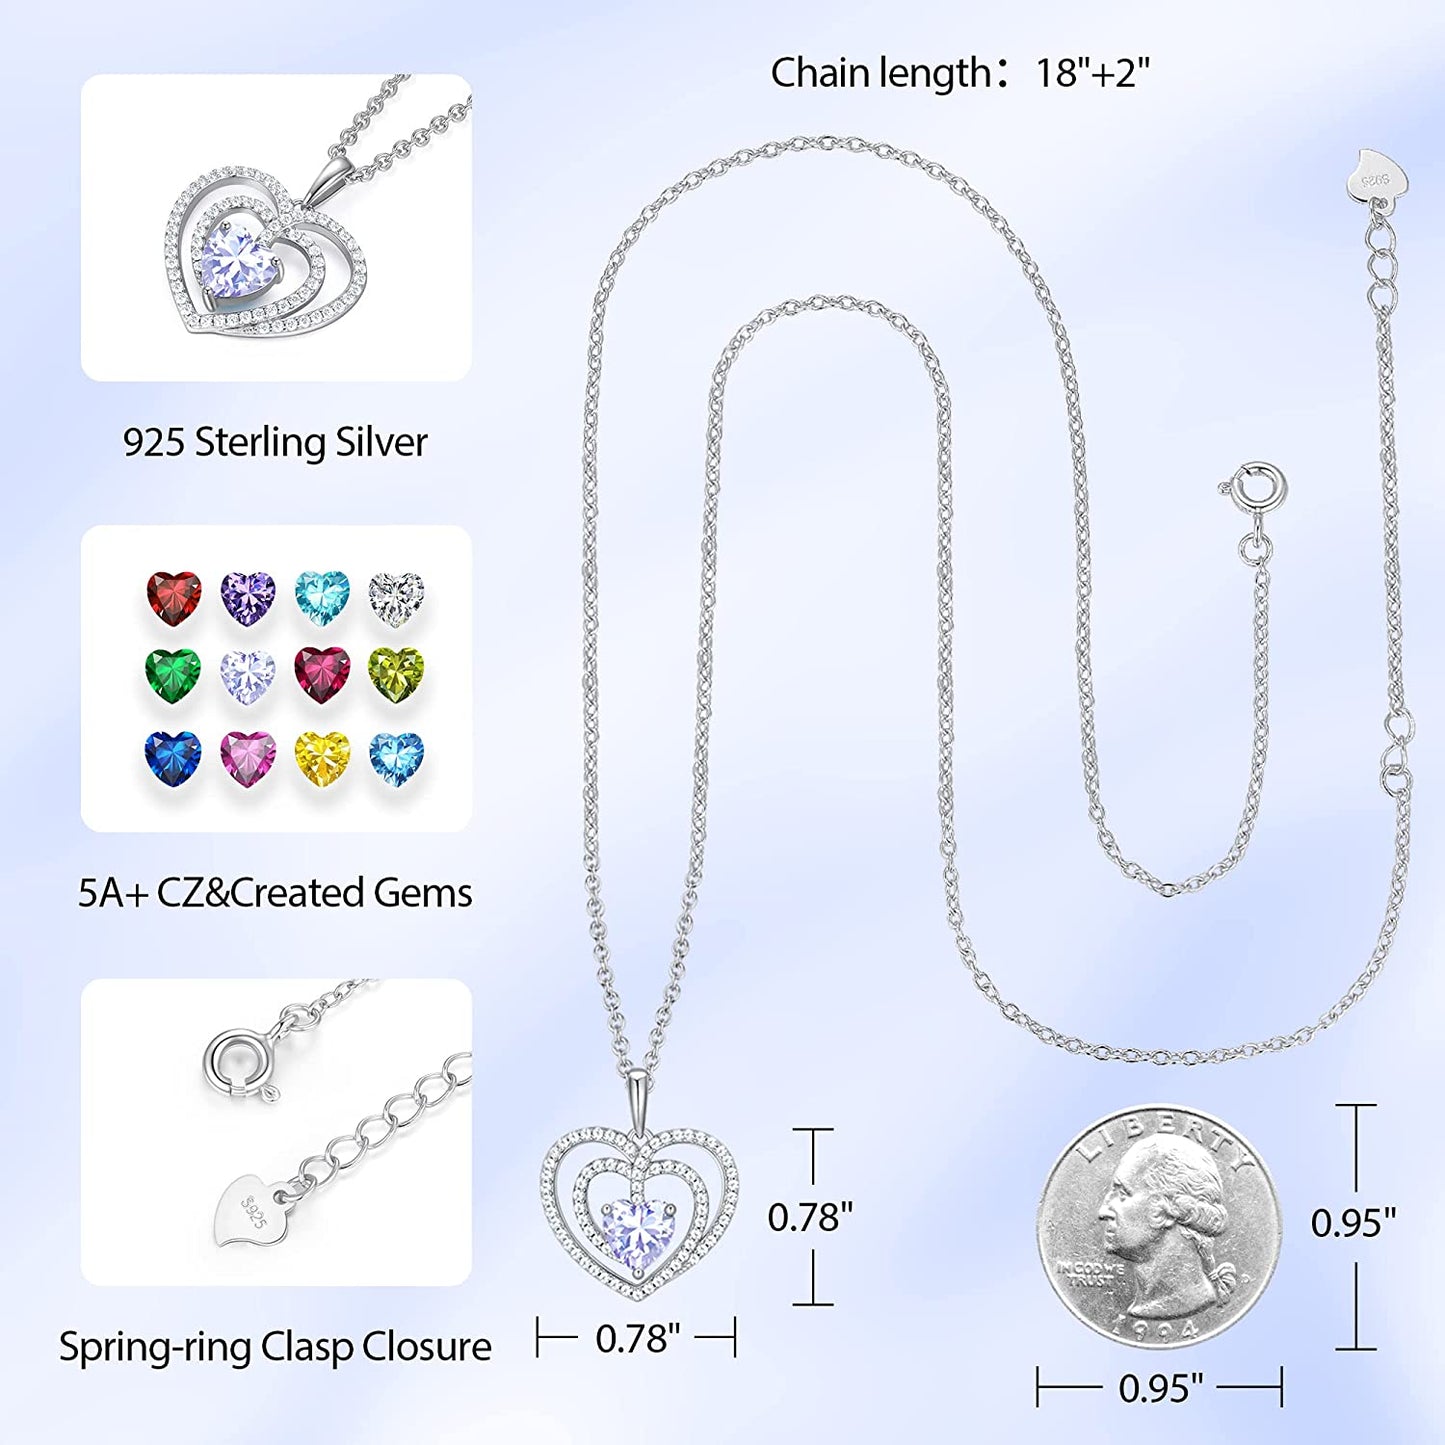 Buy Sterling Silver Birthstone Necklace - Heart Pendant Jewelry